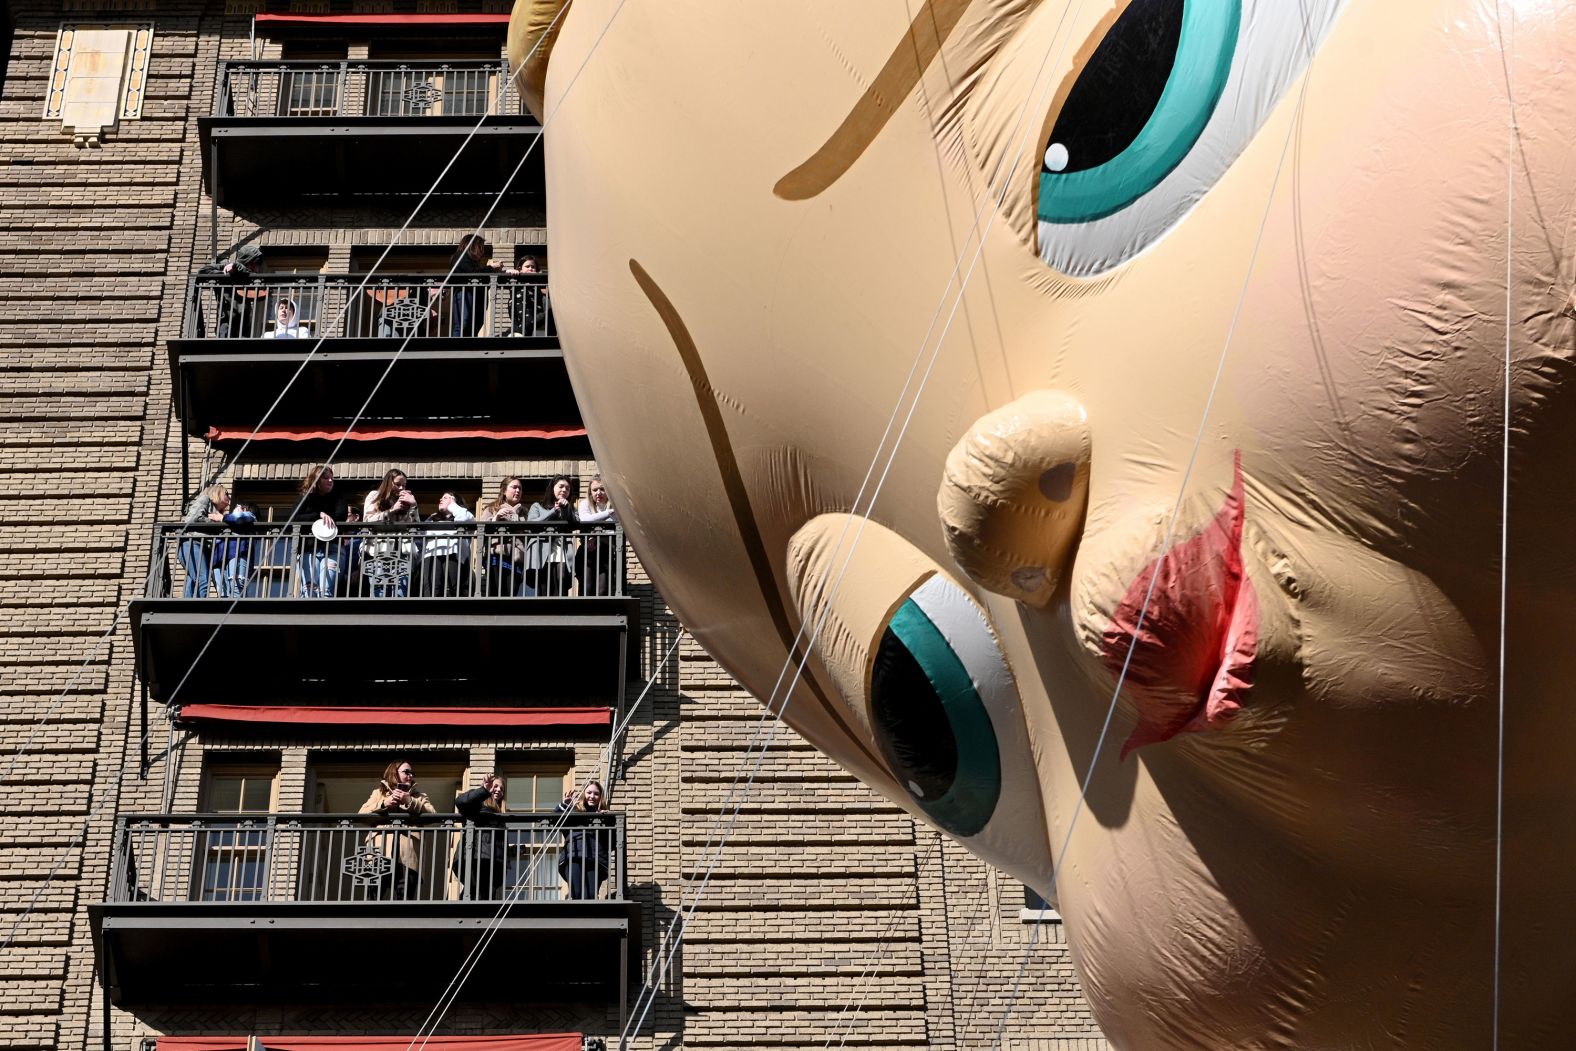 The "Boss Baby" balloon passes people standing on their balconies in New York.